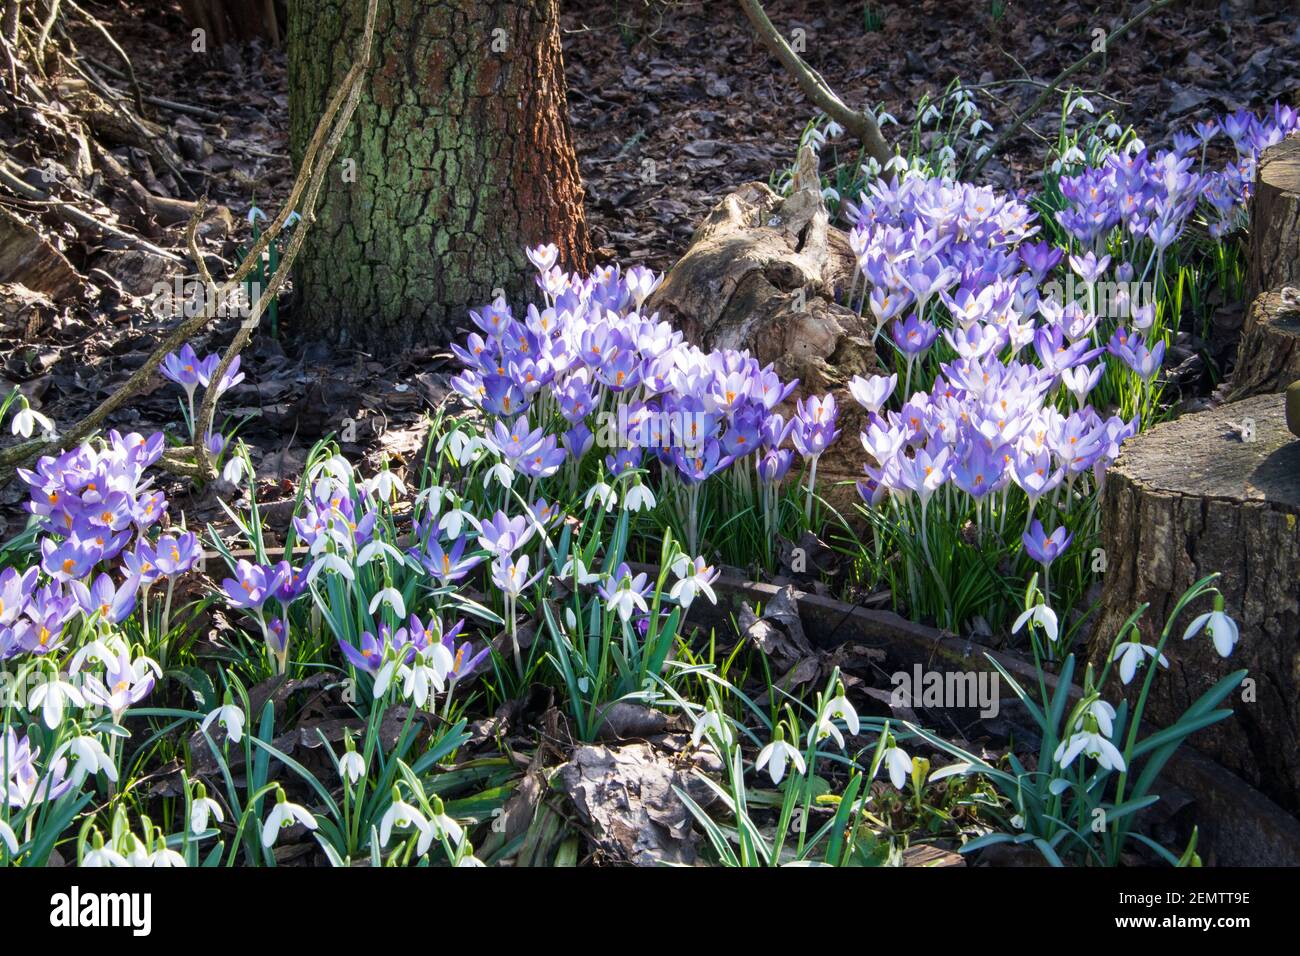 Blooming crocuses, crocus, in a meadow in spring. This year they already bloom in February. Stock Photo